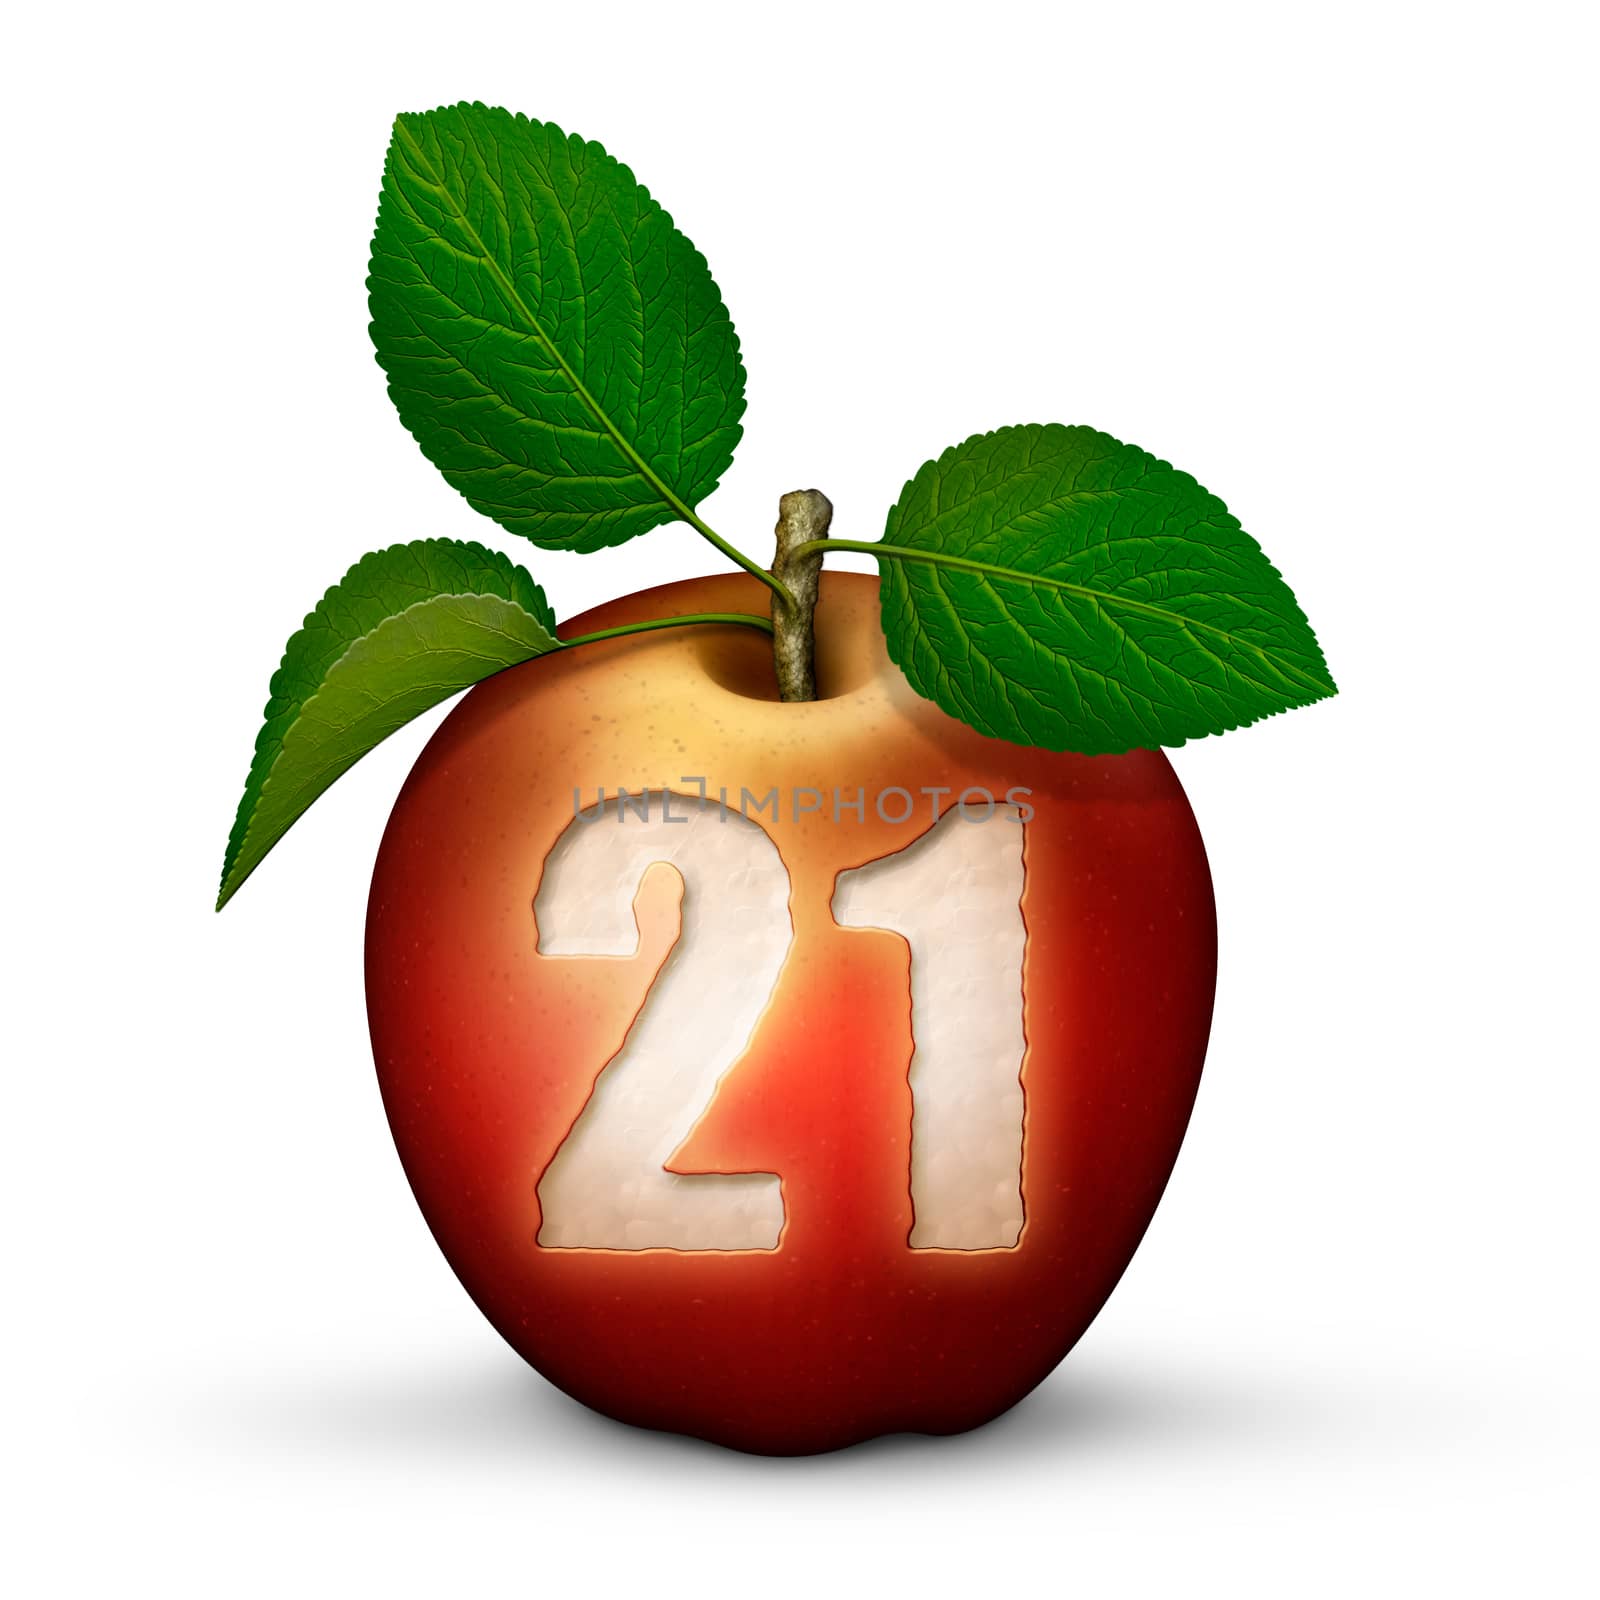 3D illustration of an apple with the number 21 bitten out of it.